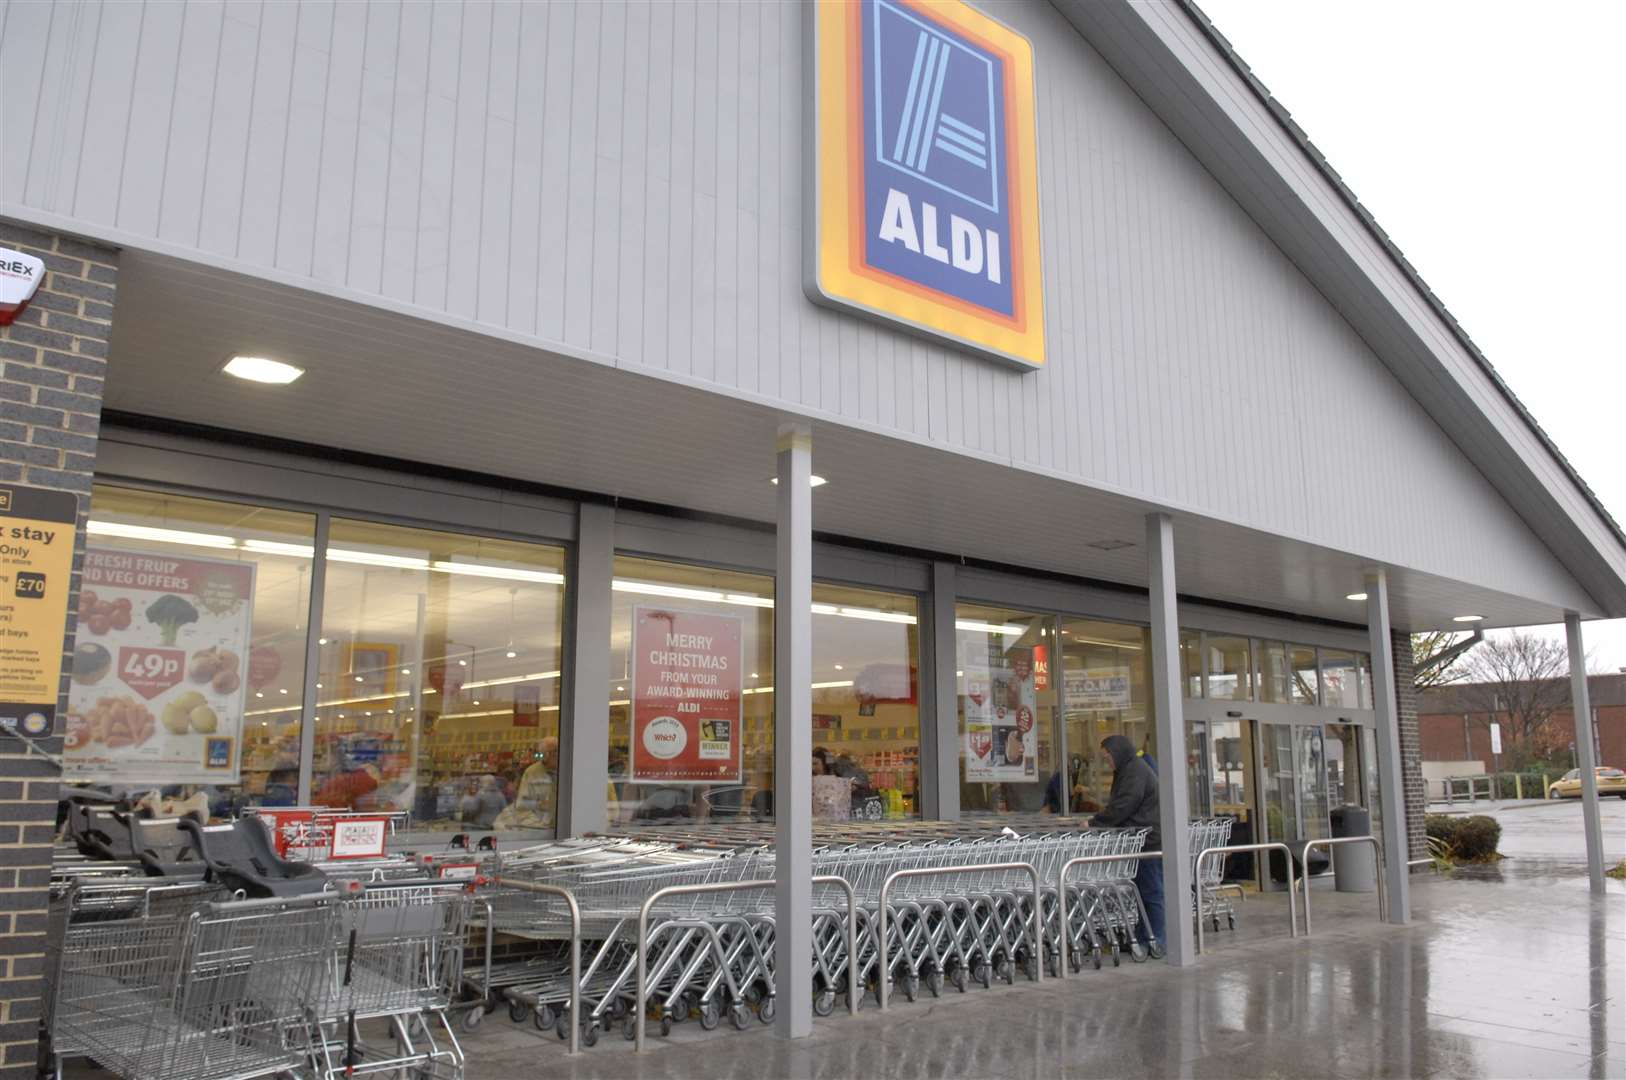 The existing Aldi store in Millennium Way, Sheerness